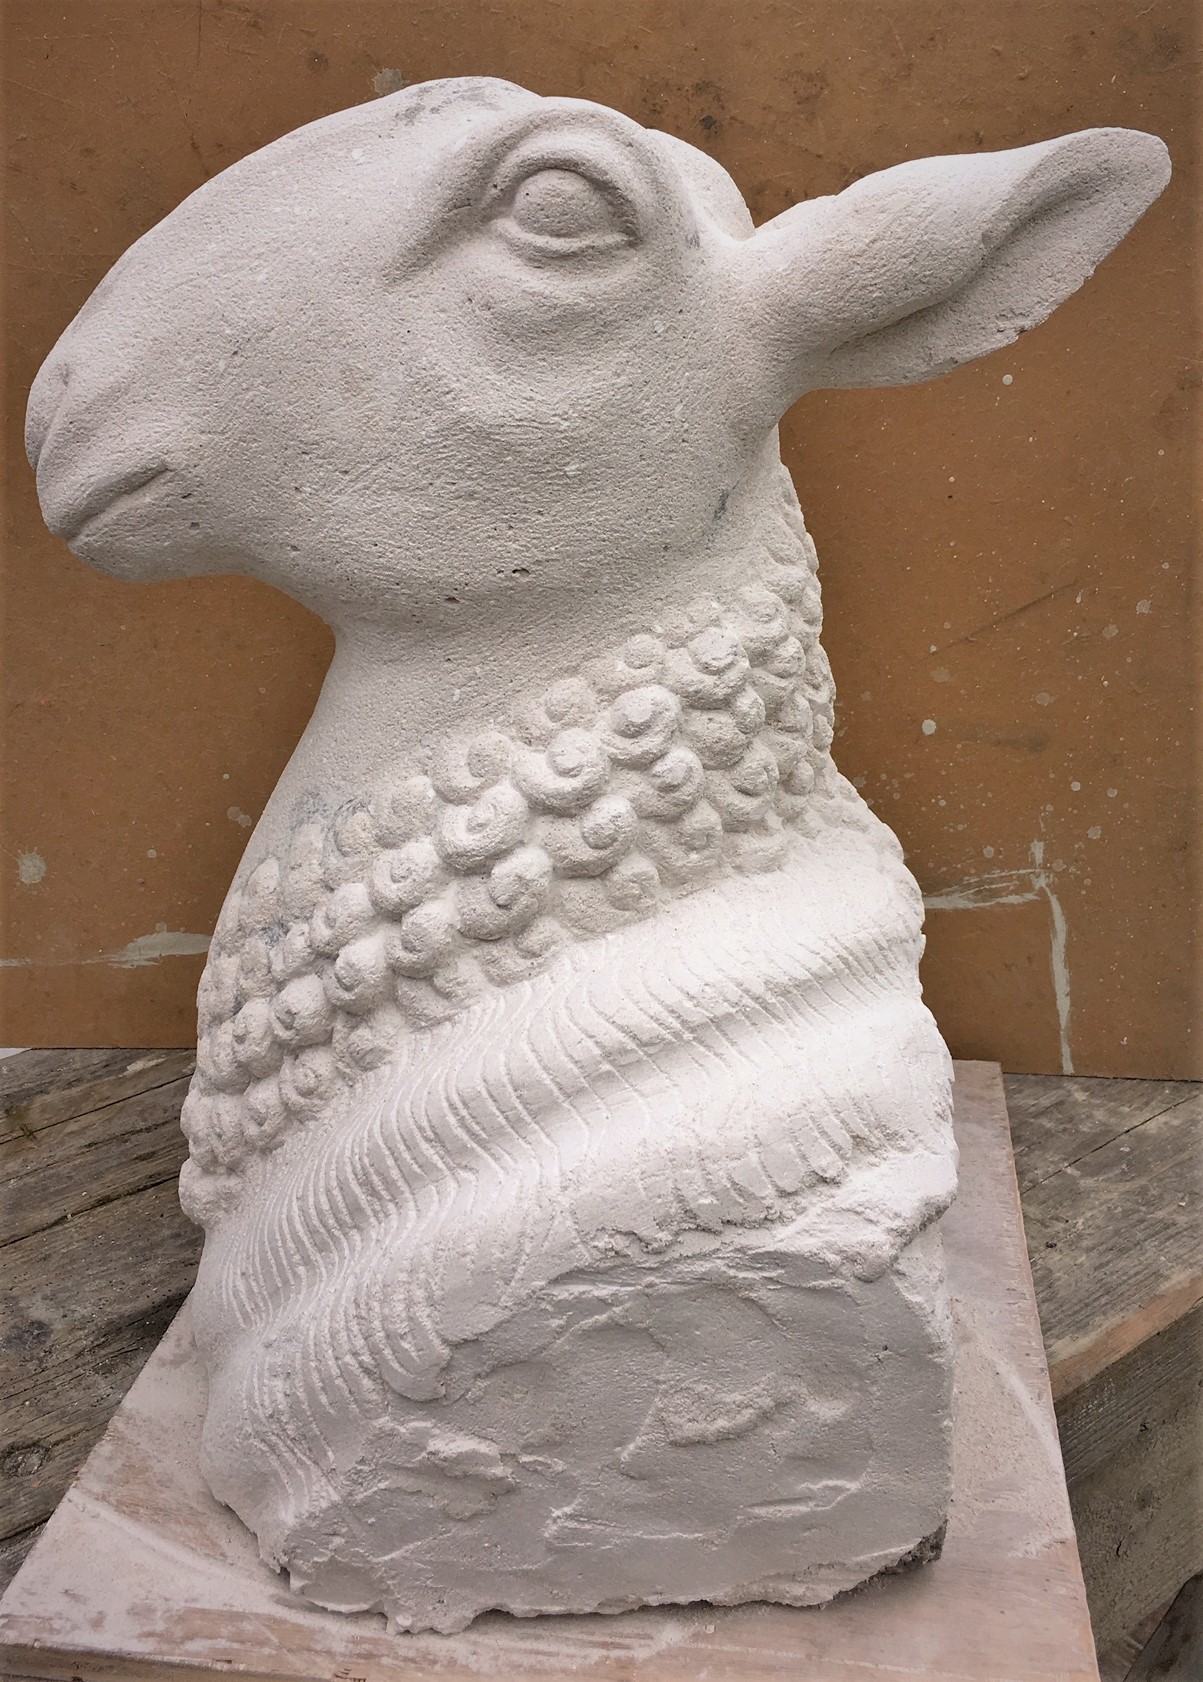 Fiona's Sheep formed from Womersleys Stone Repair